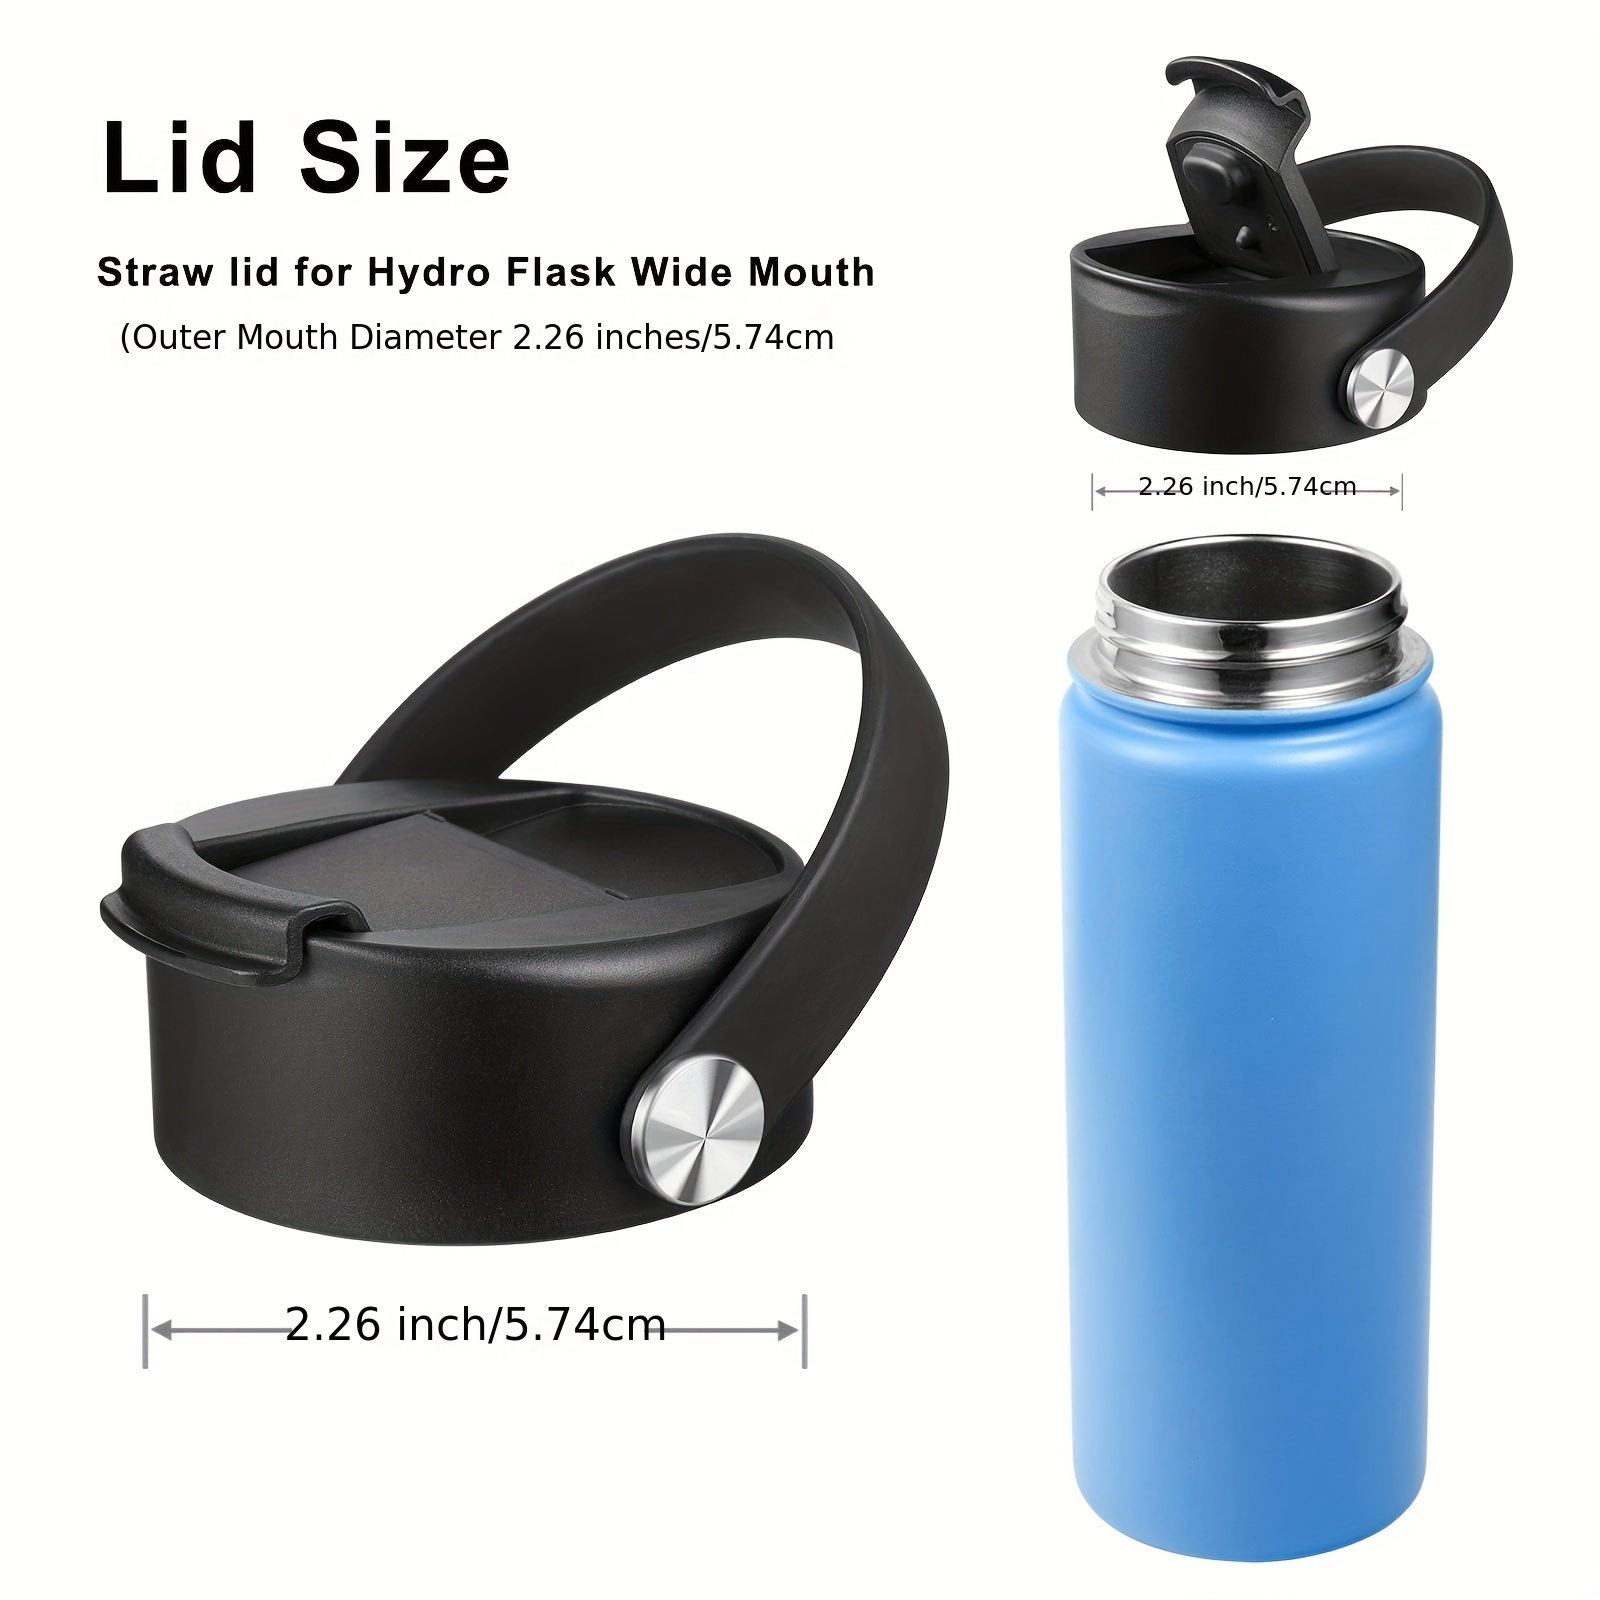 Wide Mouth Straw Lid 2 Straws and 1 Brush and 2 Protective Pads. Fits Most Sports Water Bottles. - Black